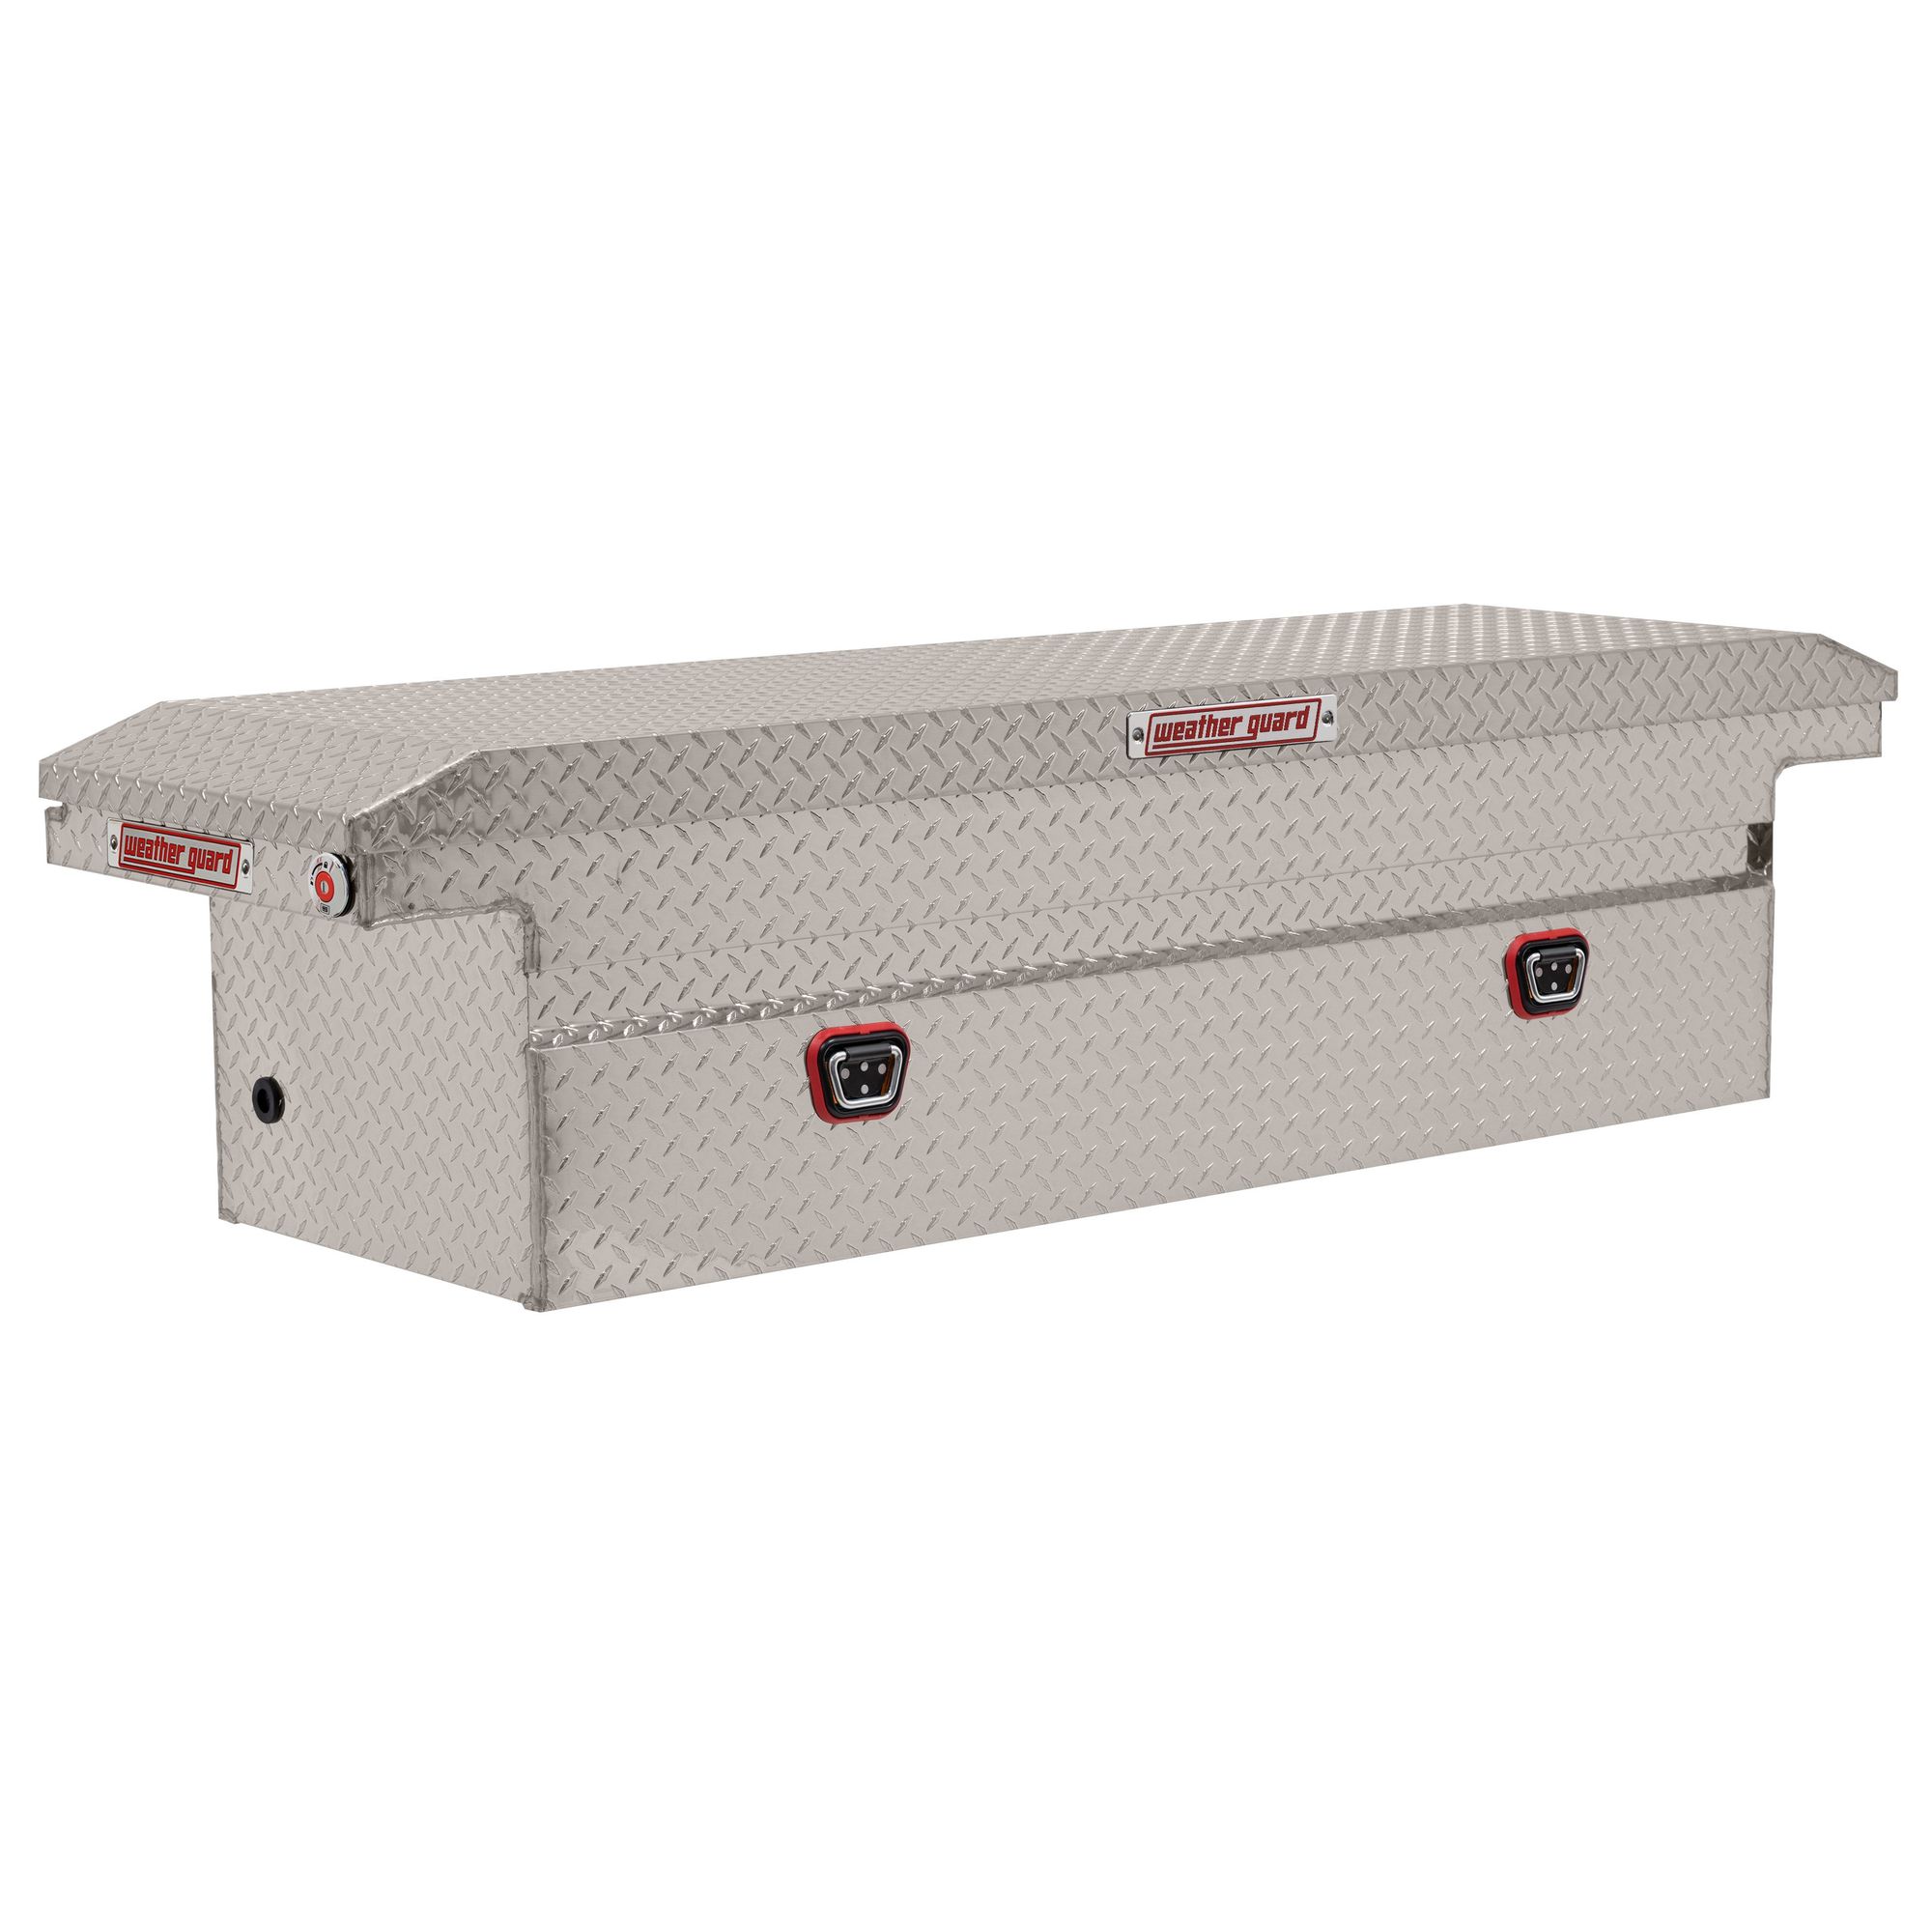 Weather Guard, 71Inch L Saddle Box, Low Profile, Width 72 in, Material Aluminum, Color Finish Diamond Plate Silver, Model 121-0-04